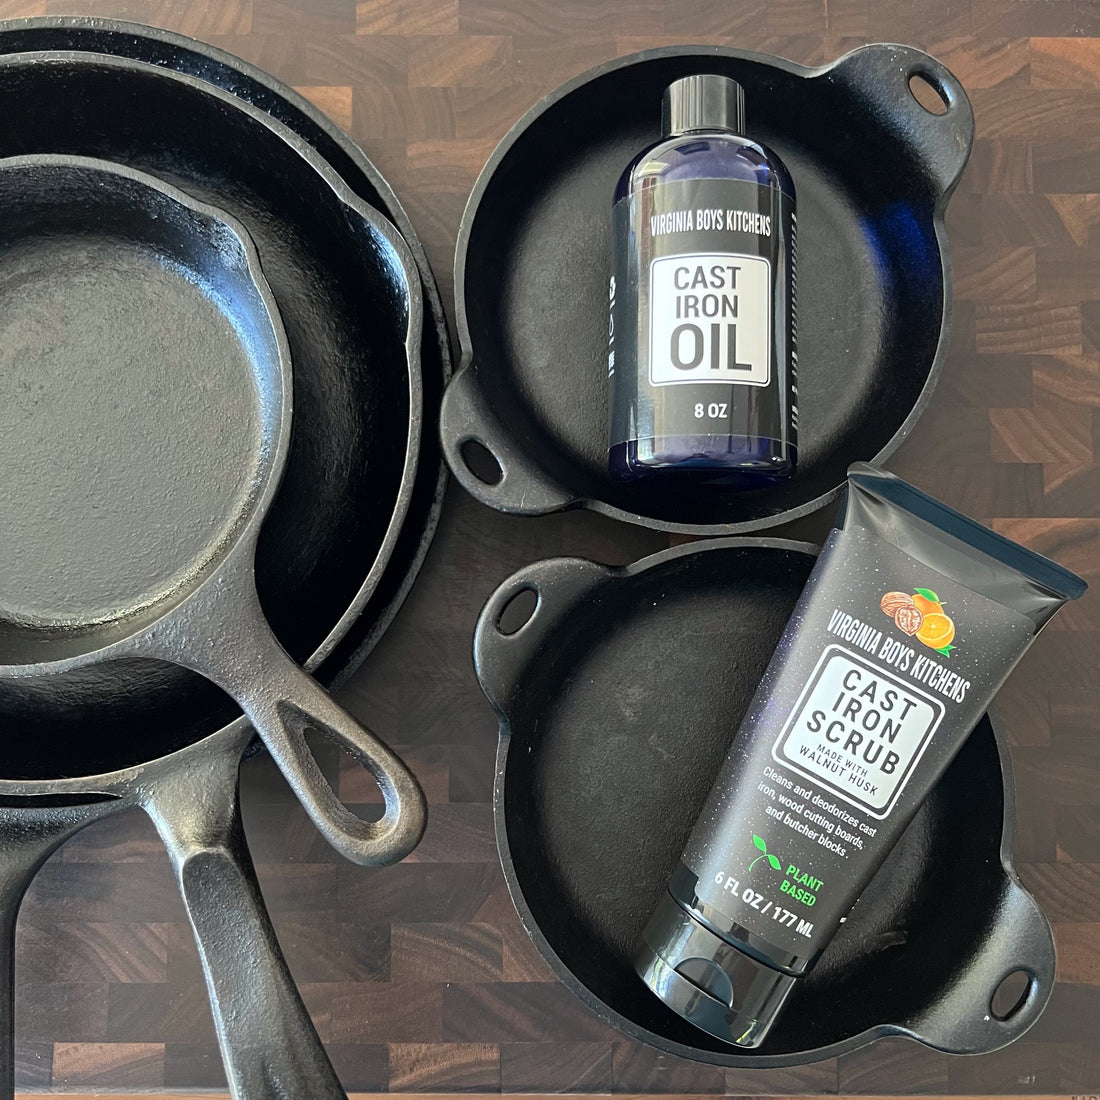 How to Season Cast Iron Cookware with Butter?